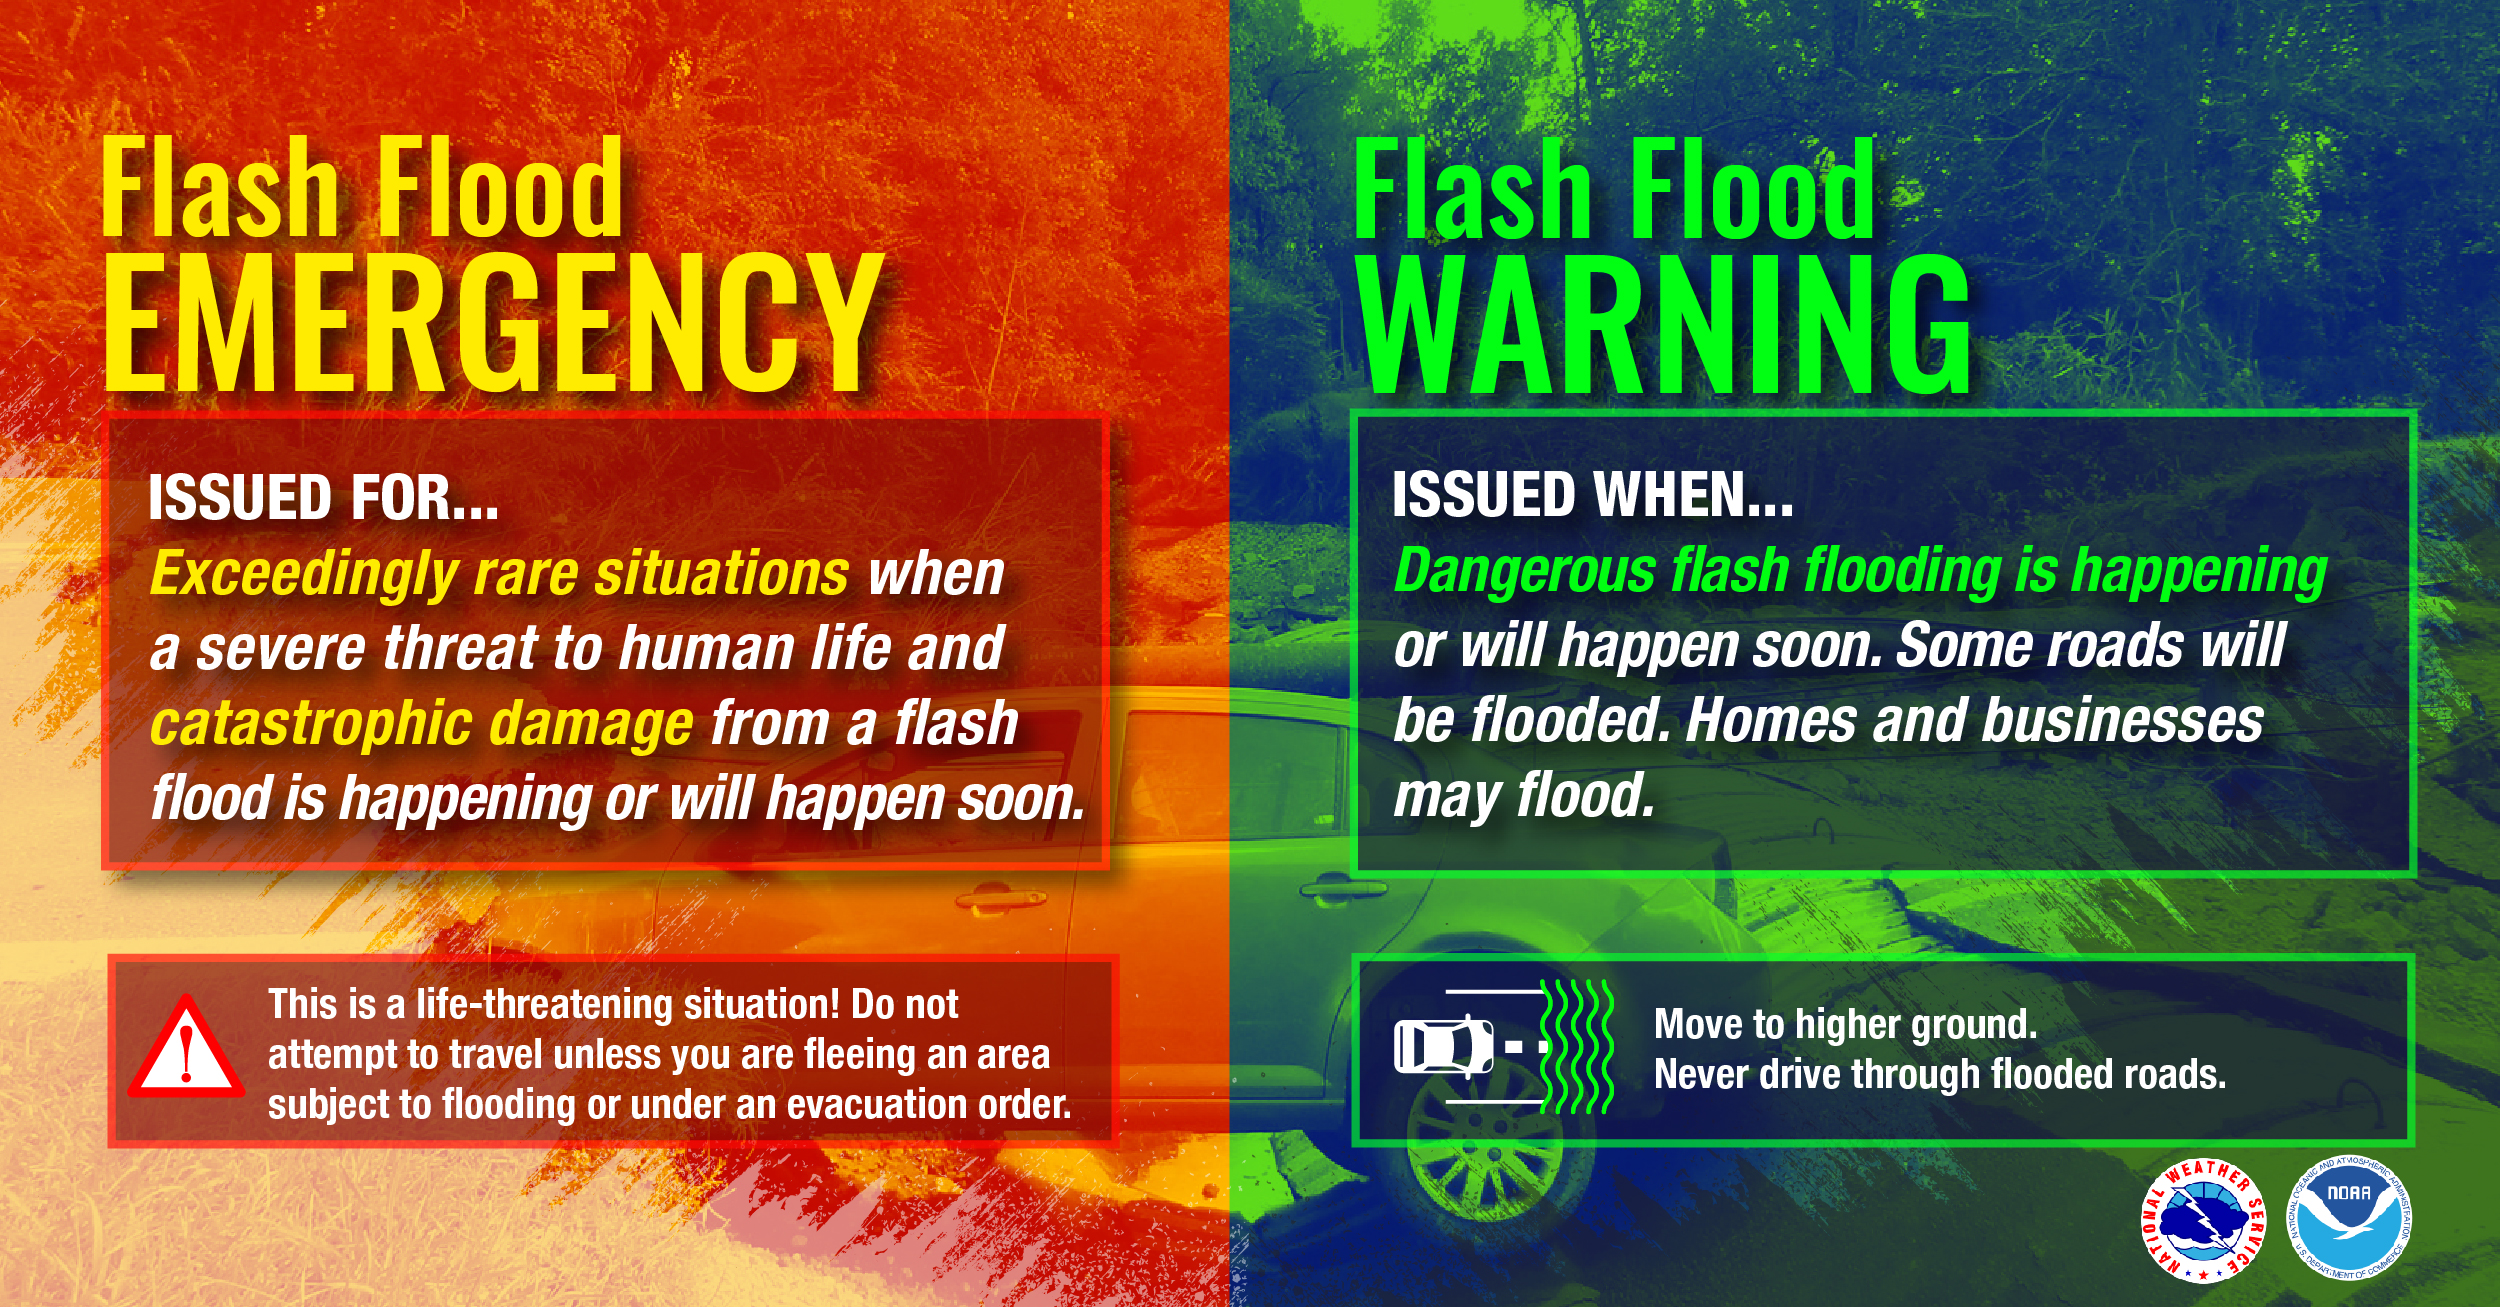 Flash Flood Emergency vs Flash Flood Warning. Flash Flood Emergencies are issued for exceeding rare situations when a severe threat to human life and catastrophic damage from a flash flood is happening or will happen soon. Flash Flood Warnings are issued when dangerous flash flooding is happening or will happen soon. Some roads will be flooded. Homes and businesses may flood.